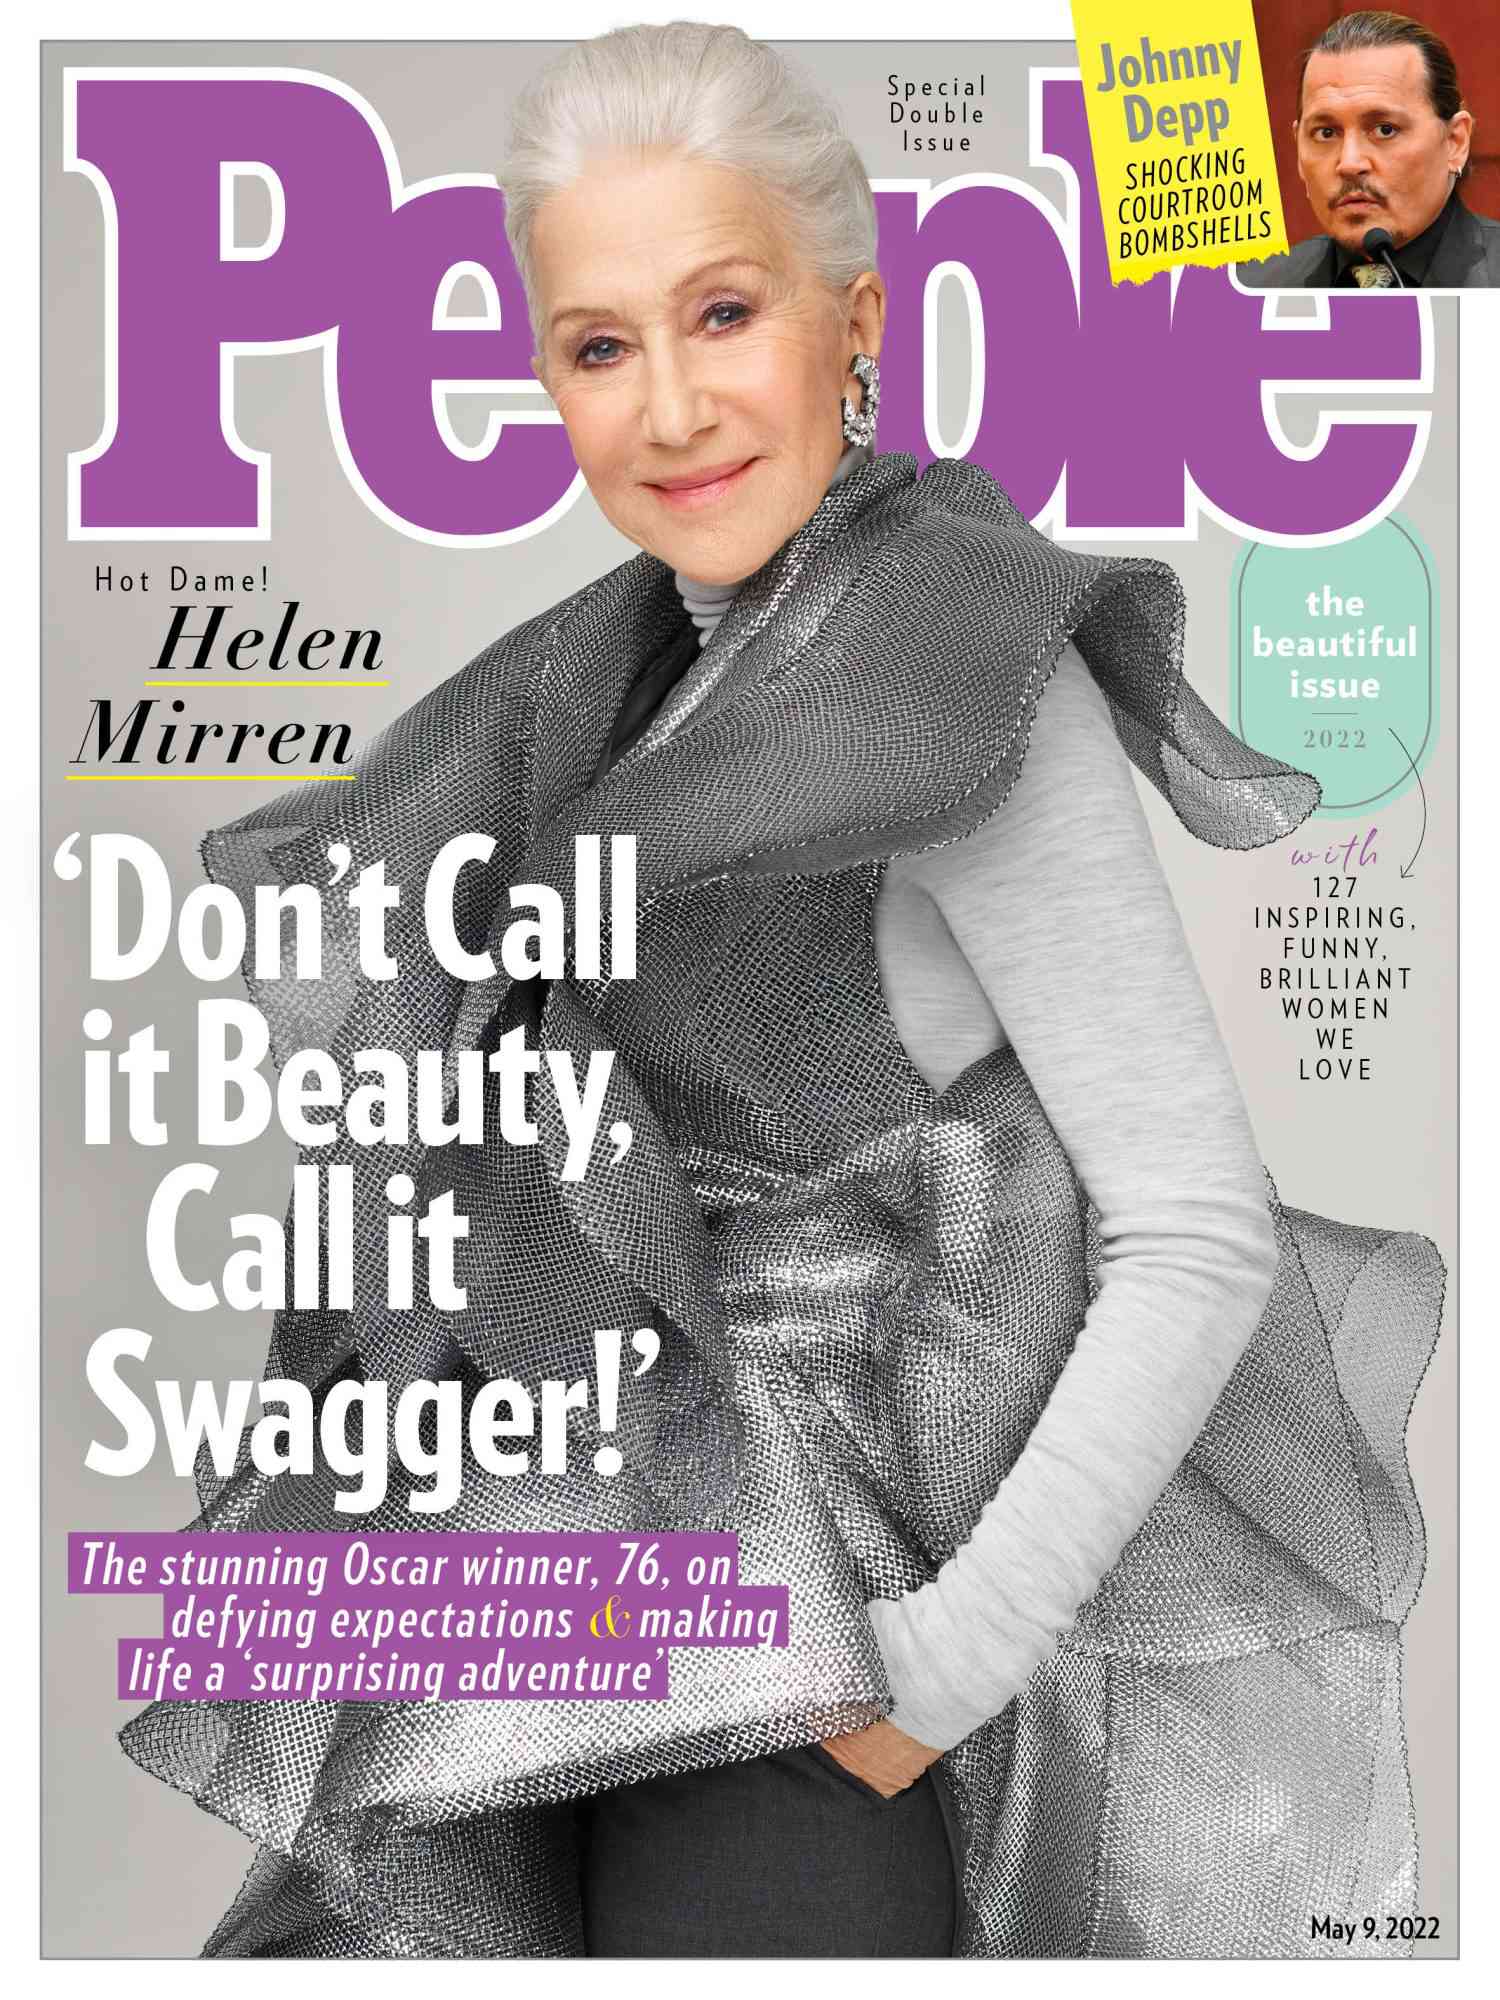 PEOPLE Cover - Helen Mirren - The Beautiful Issue